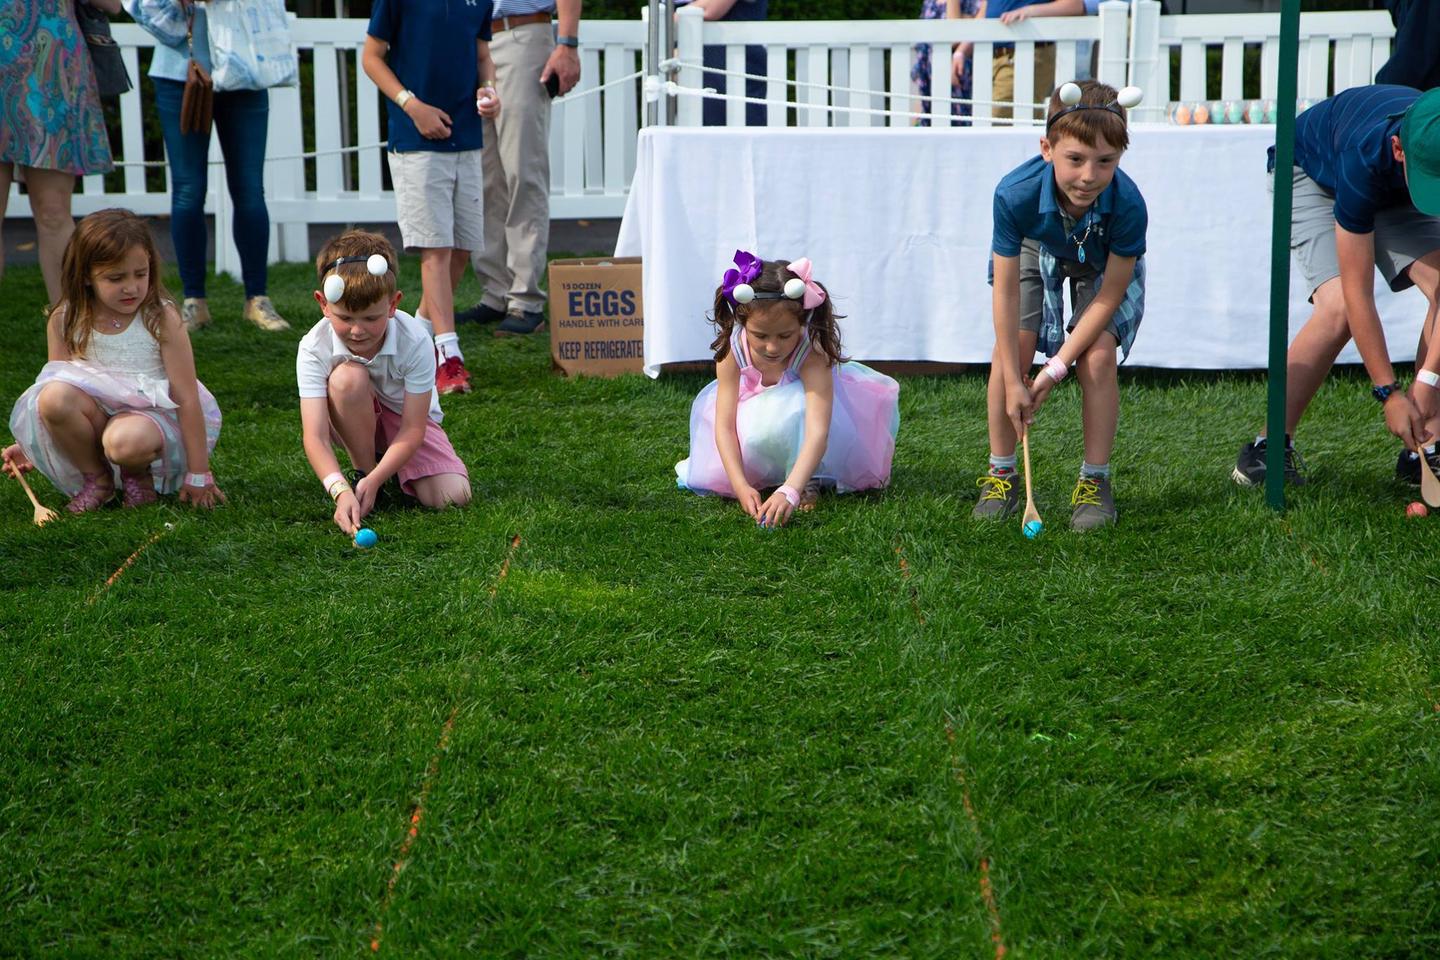 A close-up of children participating in the egg roll